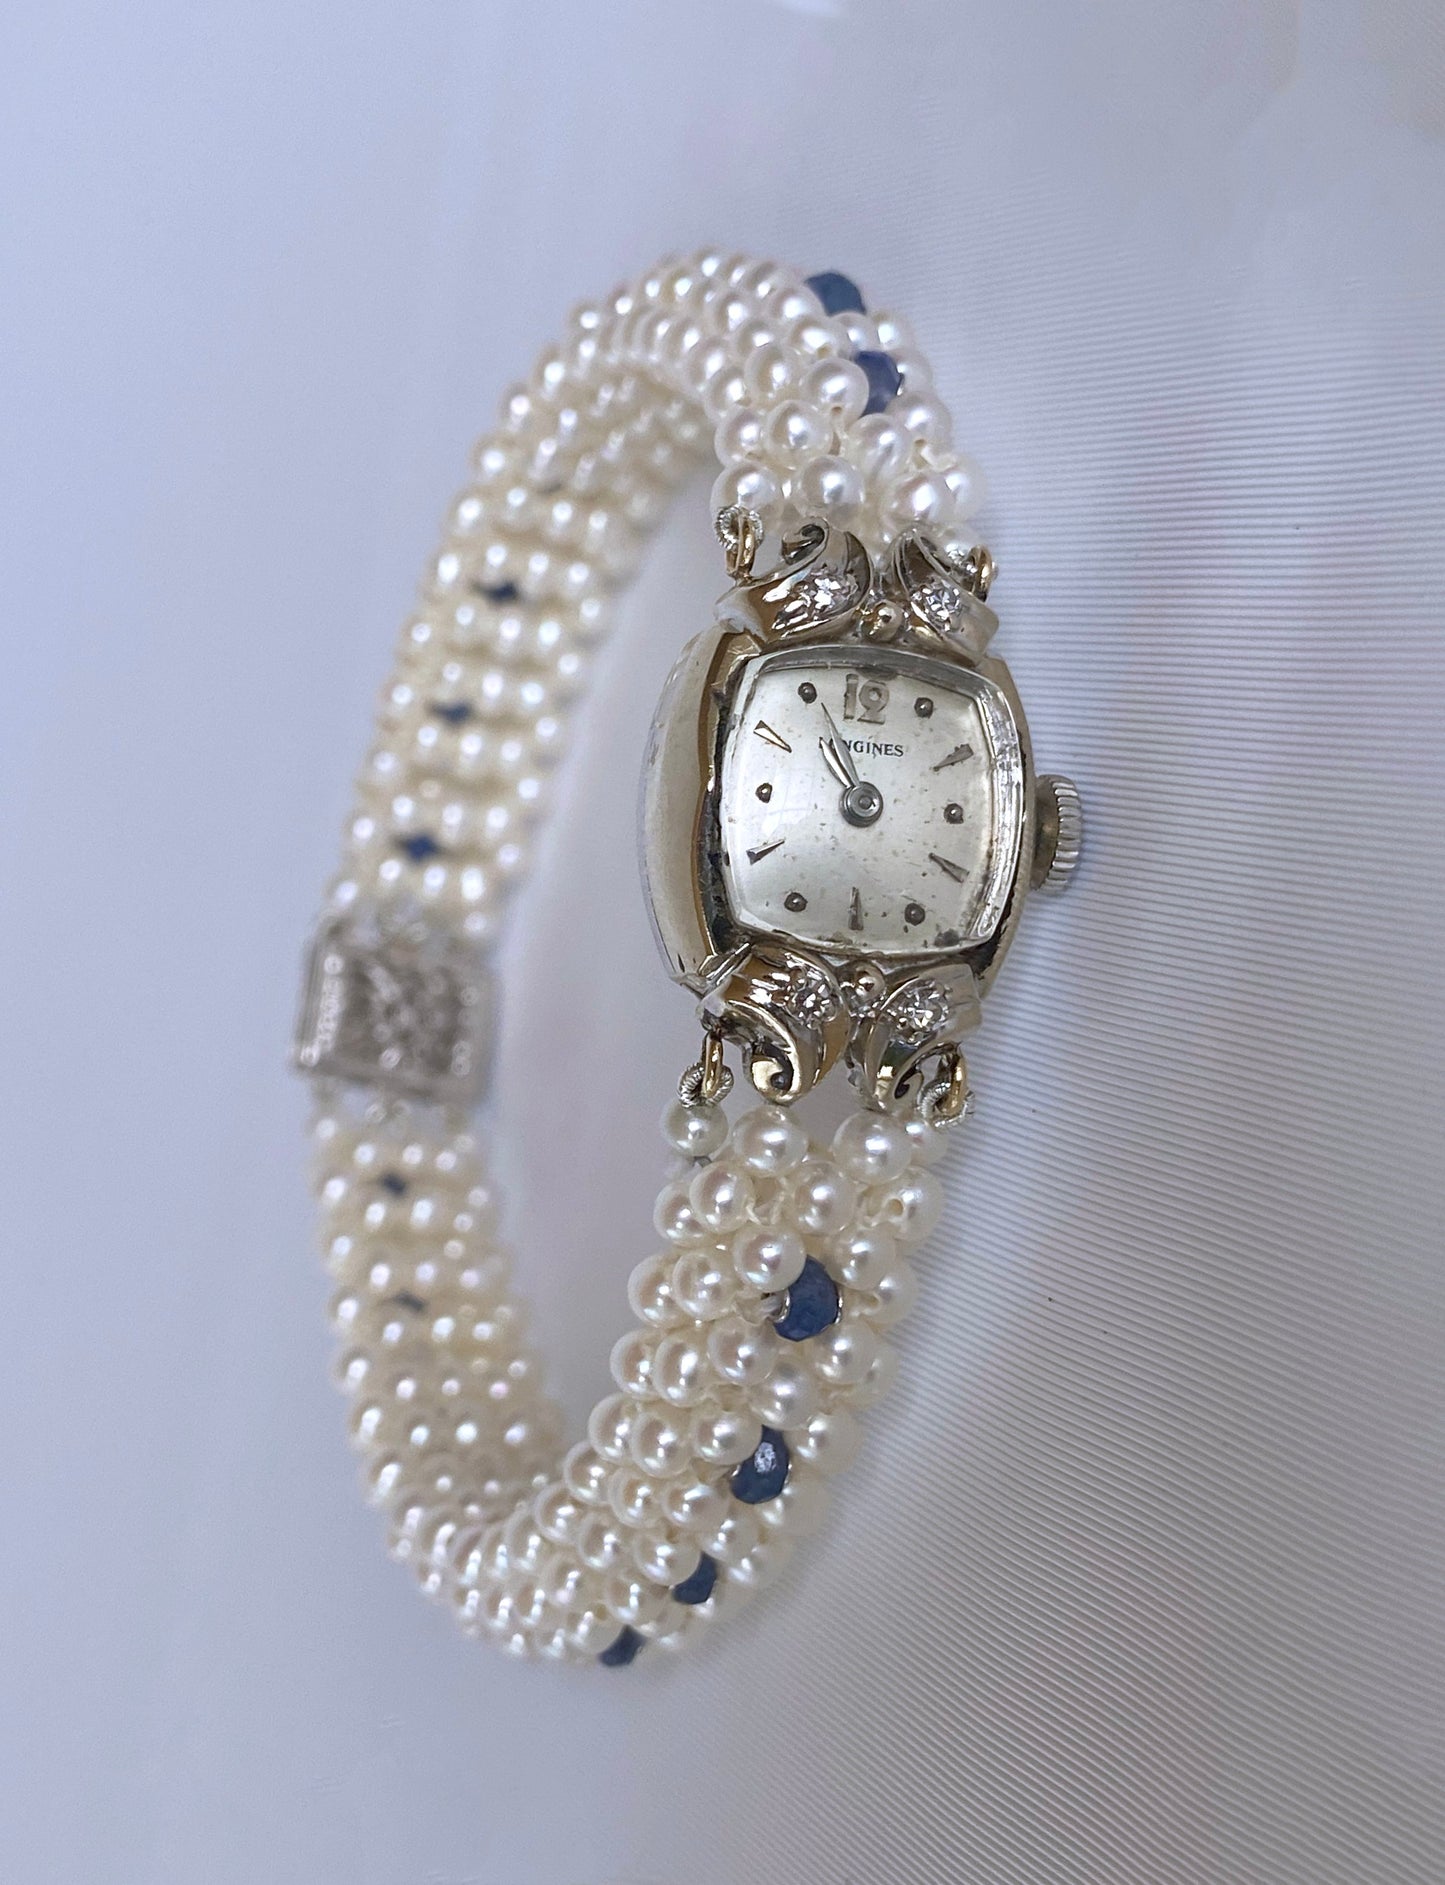 Antique 14k Longines Diamond Encrusted Watch with Blue Sapphire and Pearl Band